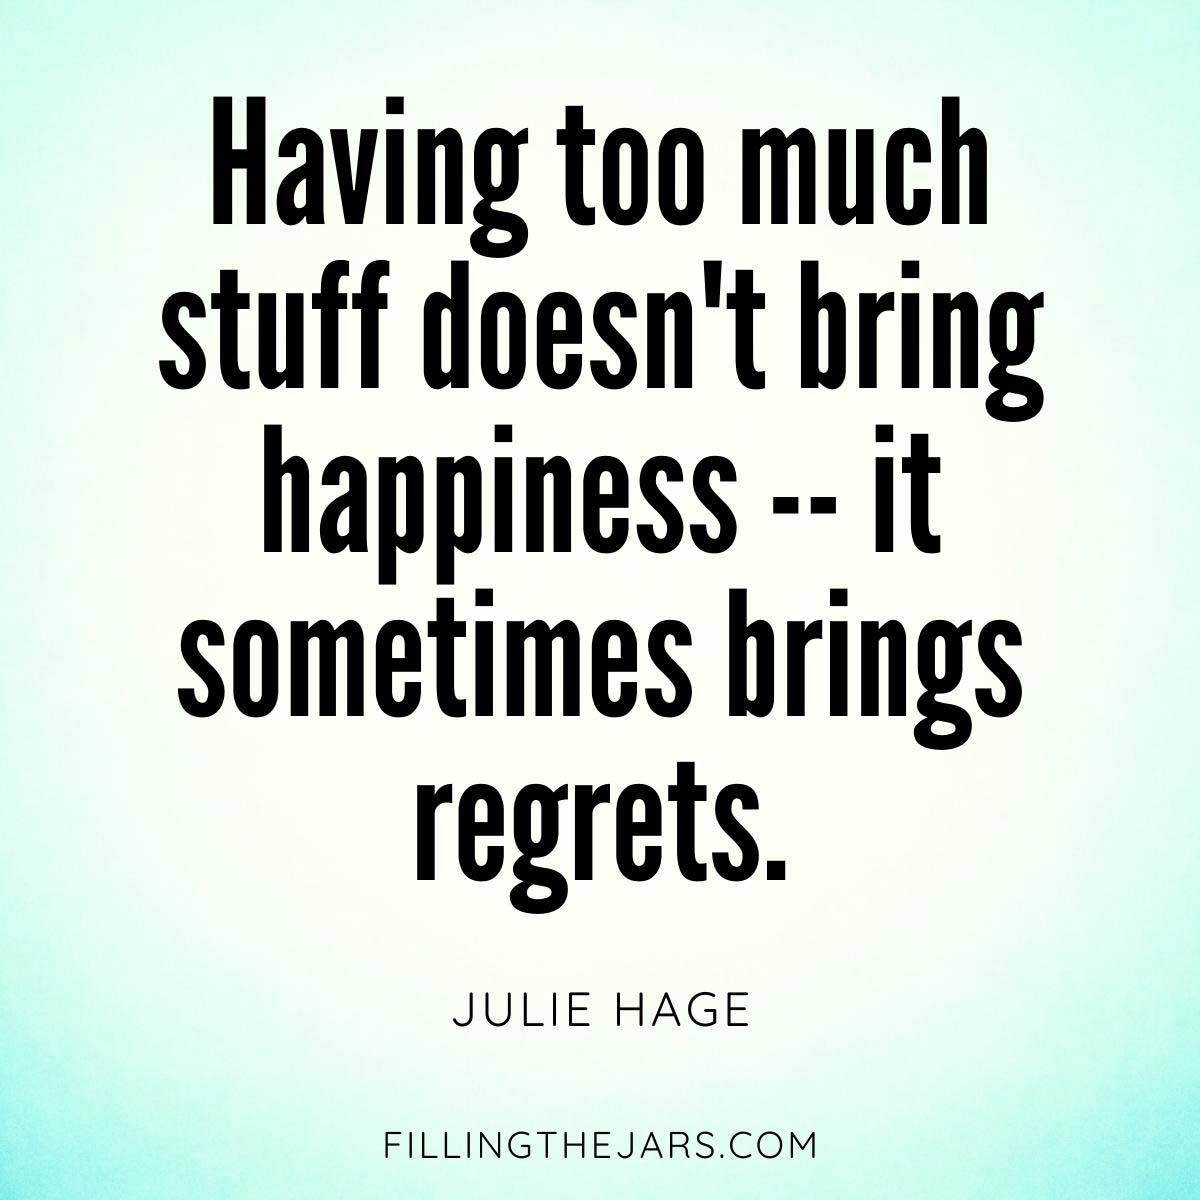 Julie Hage too much stuff brings regrets quote in black text on turquoise and white background.